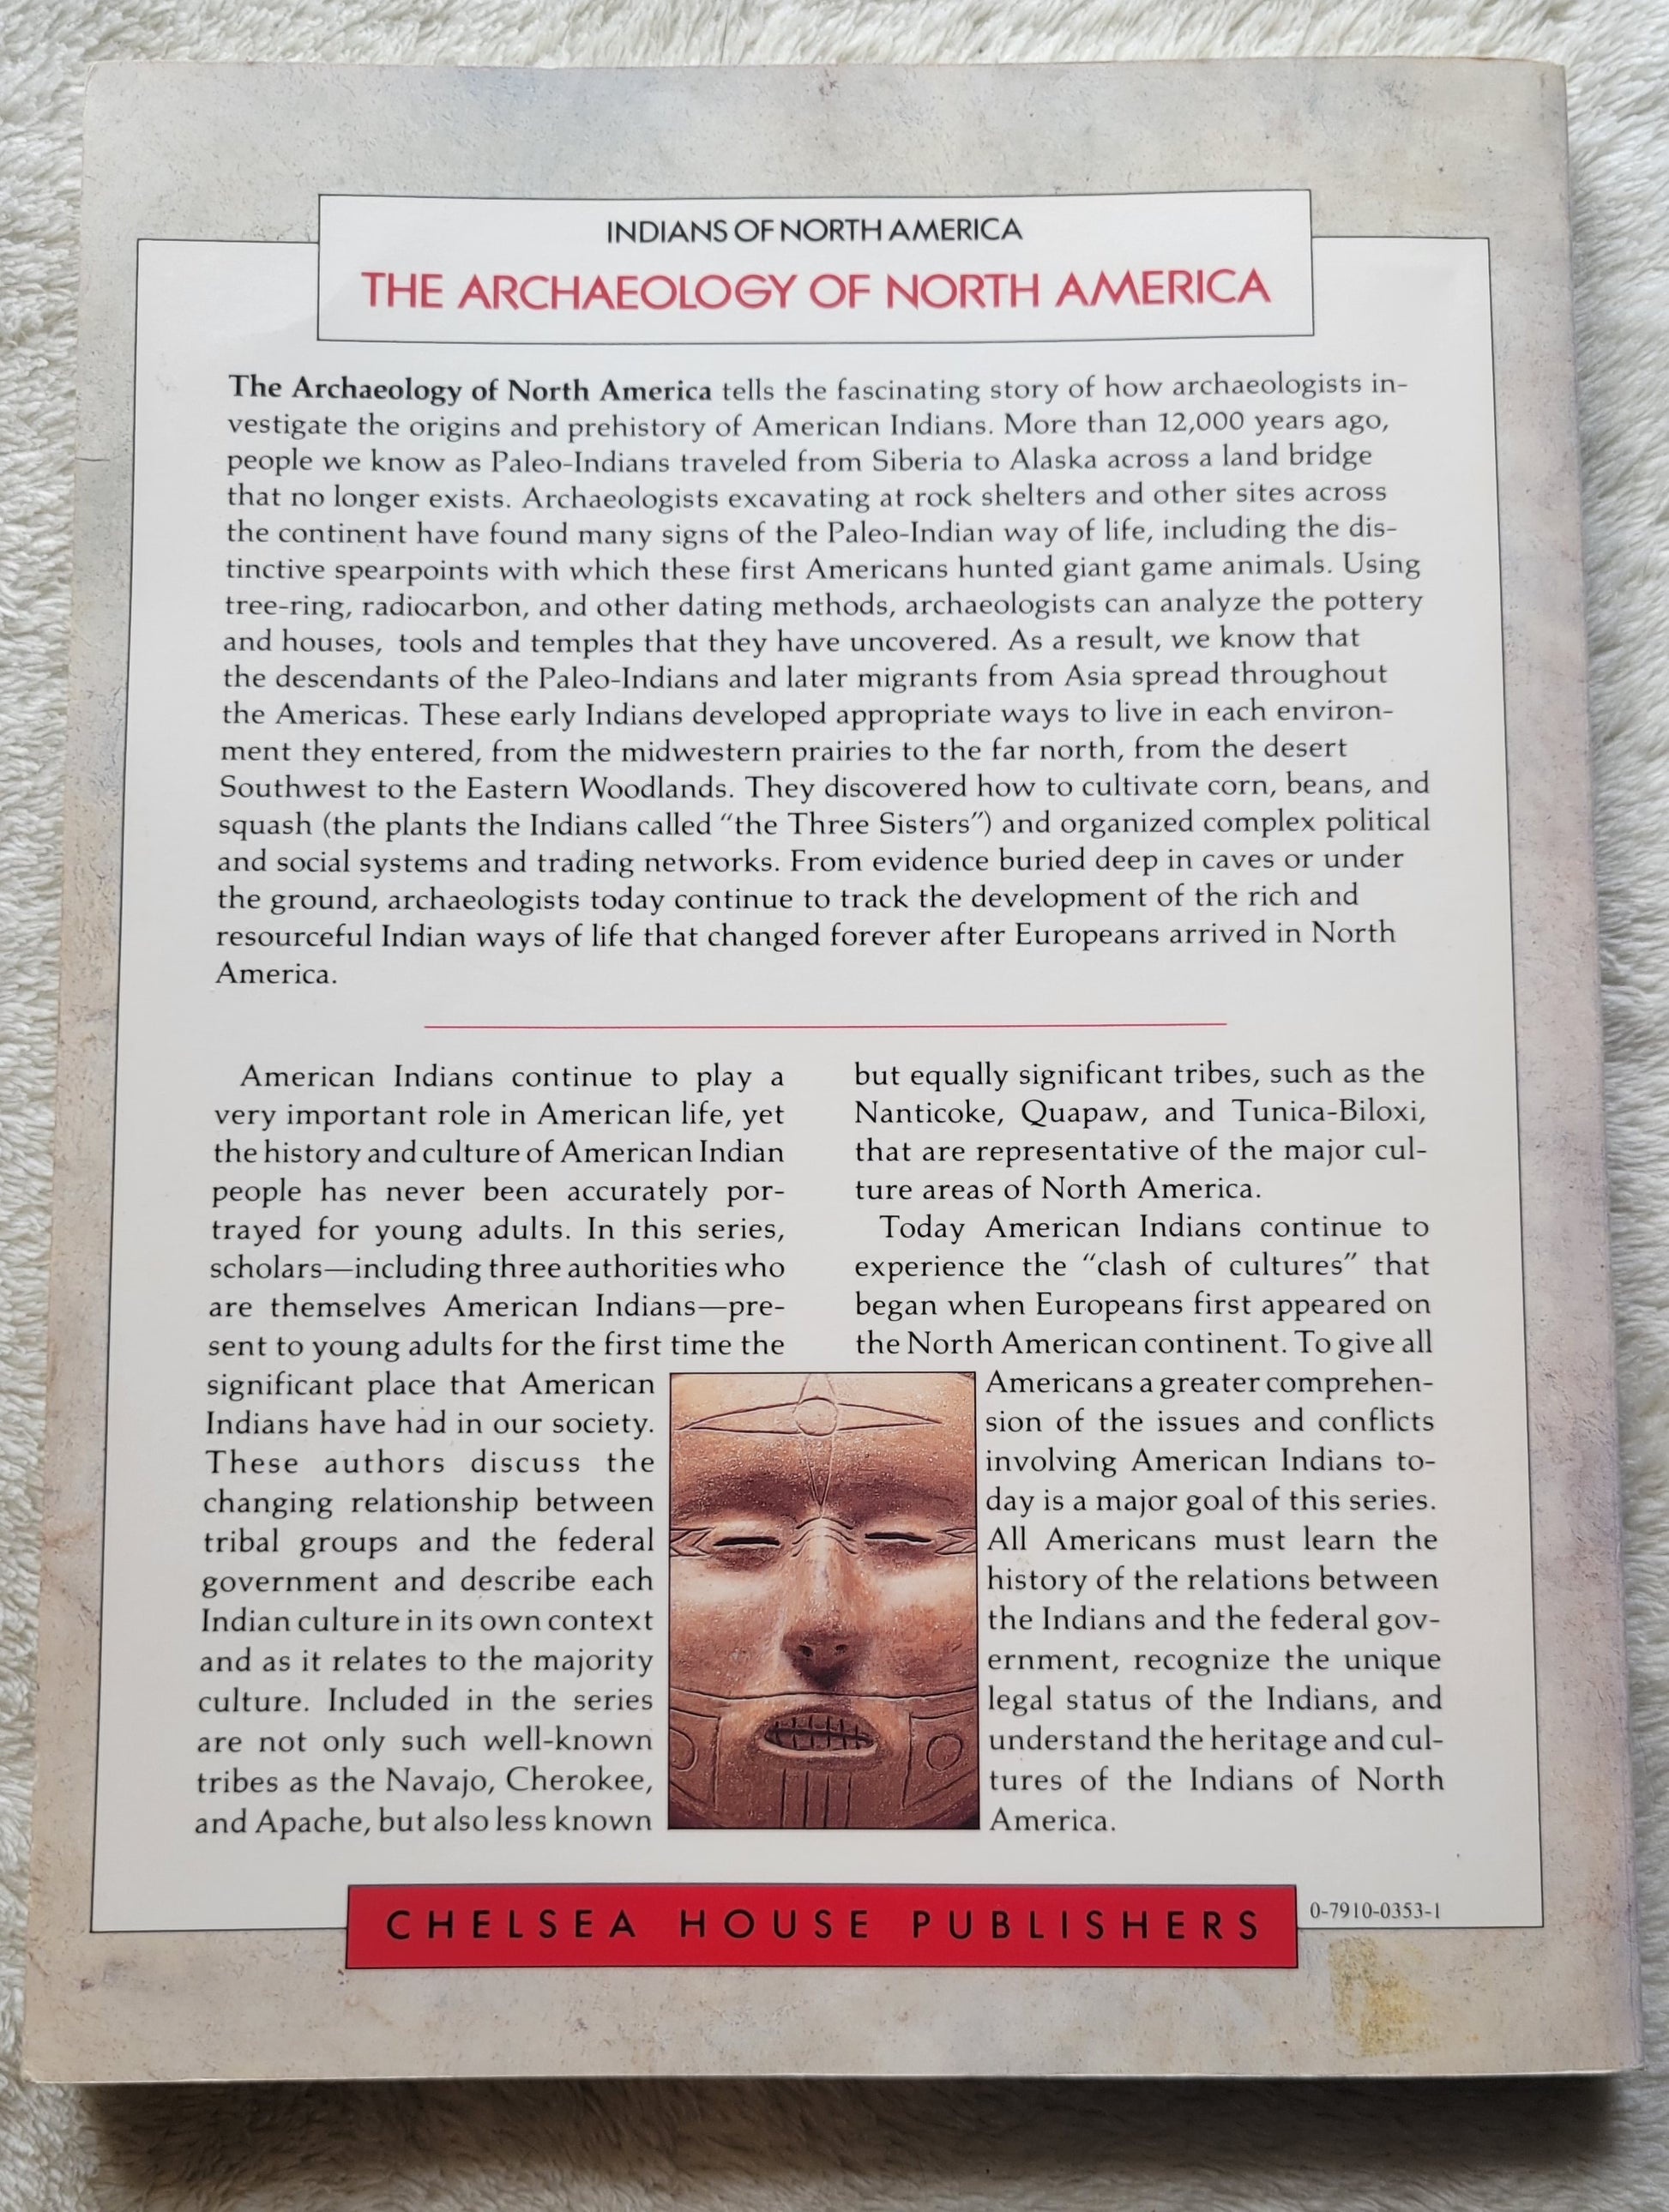 "Archaeology of North America" by Dean R. Snow, Chelsea House publishers, 1989. "Archaeology of North America tells the fascinating story of how archaeologists investigate the origins and prehistory of American Indians.  View of back..